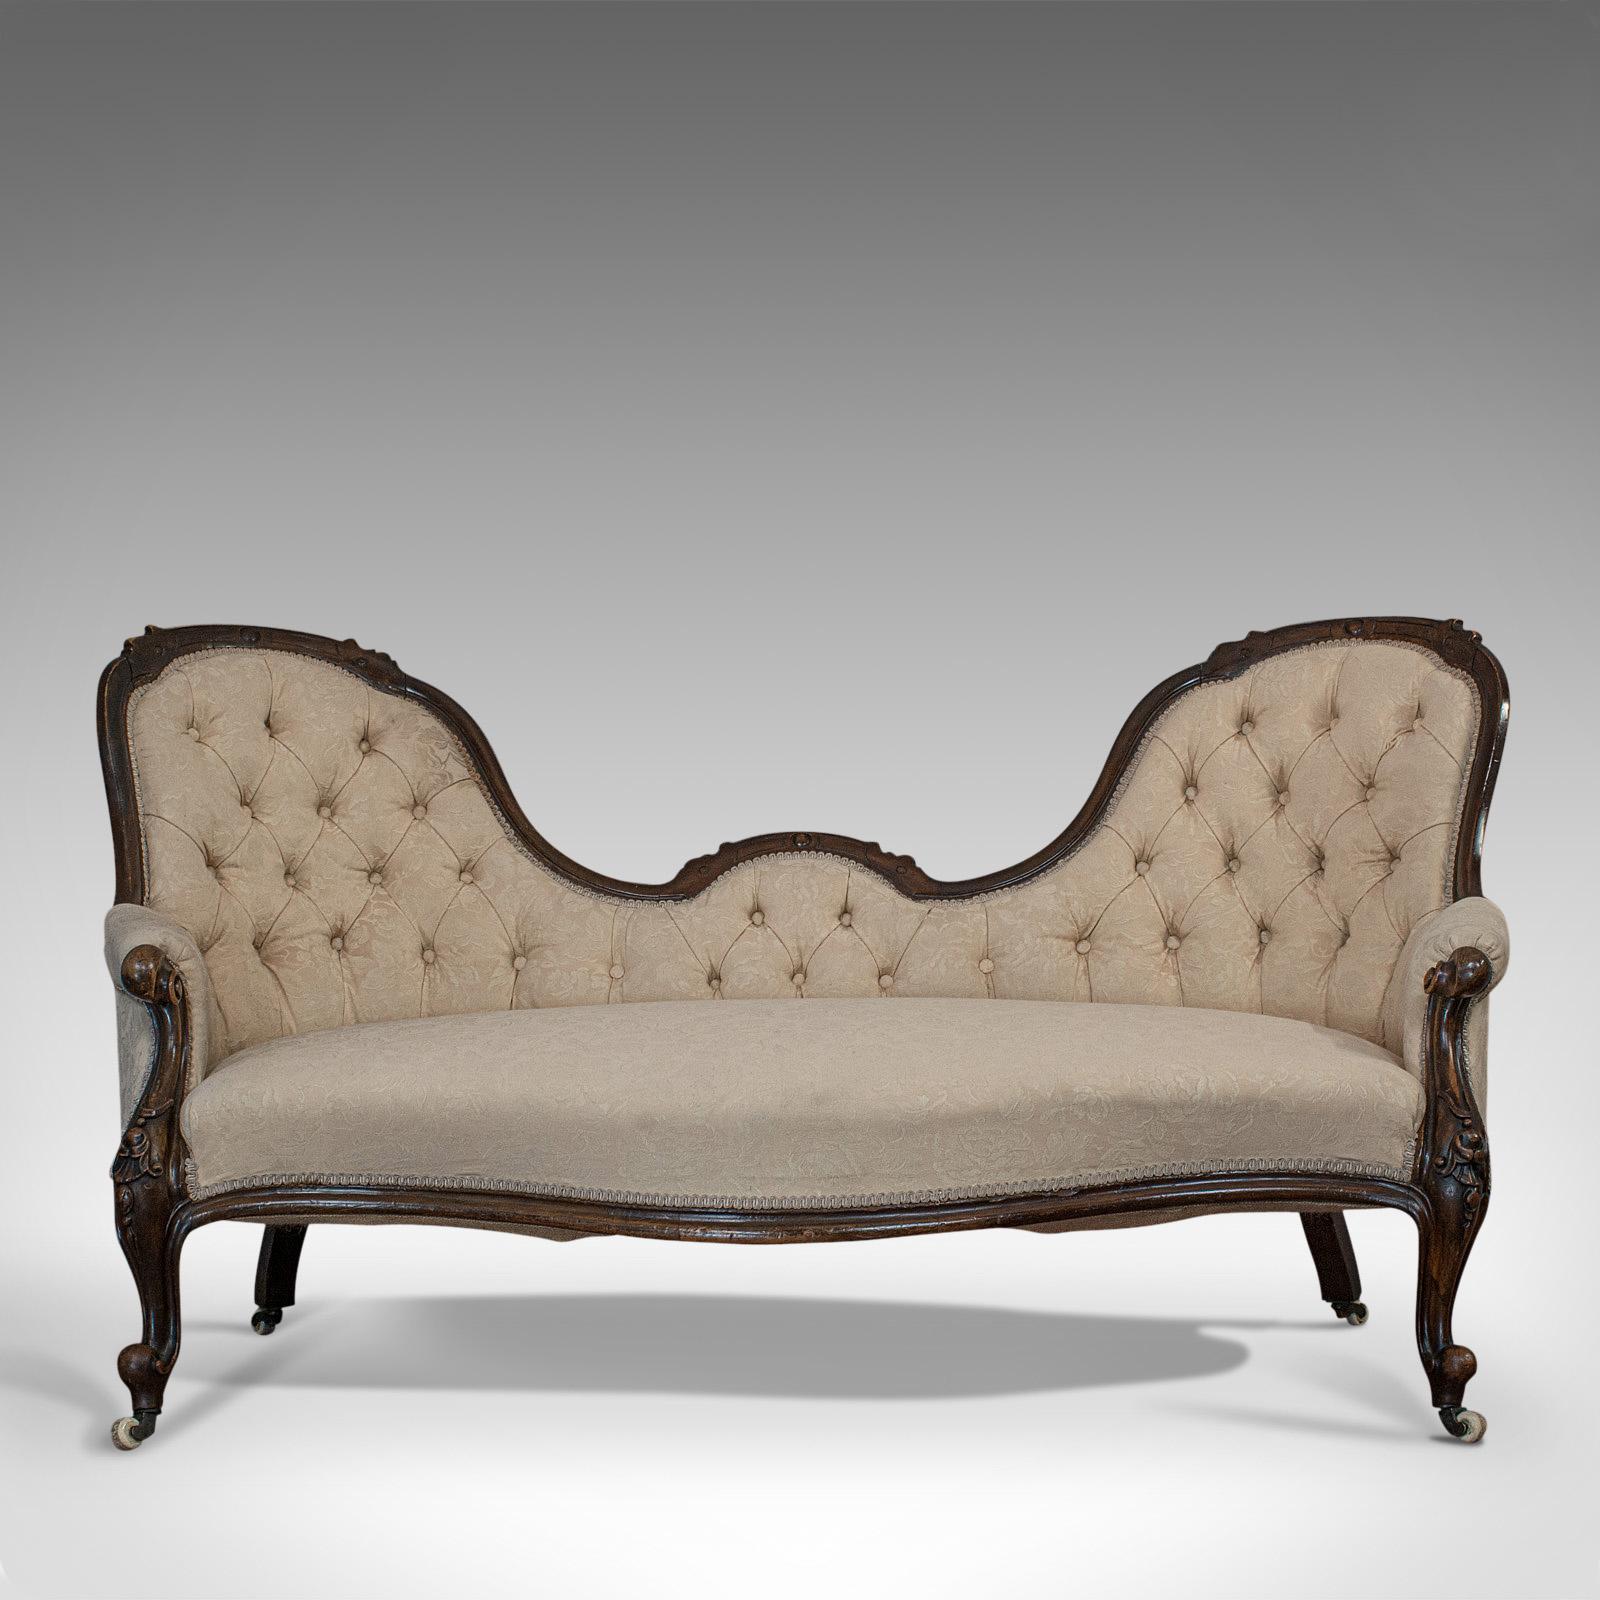 This is an antique double spoonback sofa. An English, walnut camel back settee dating to the Victorian period in the mid-19th century, circa 1850.

Classic Victorian elegance and exuding quality
Displays a desirable aged patina
Select walnut